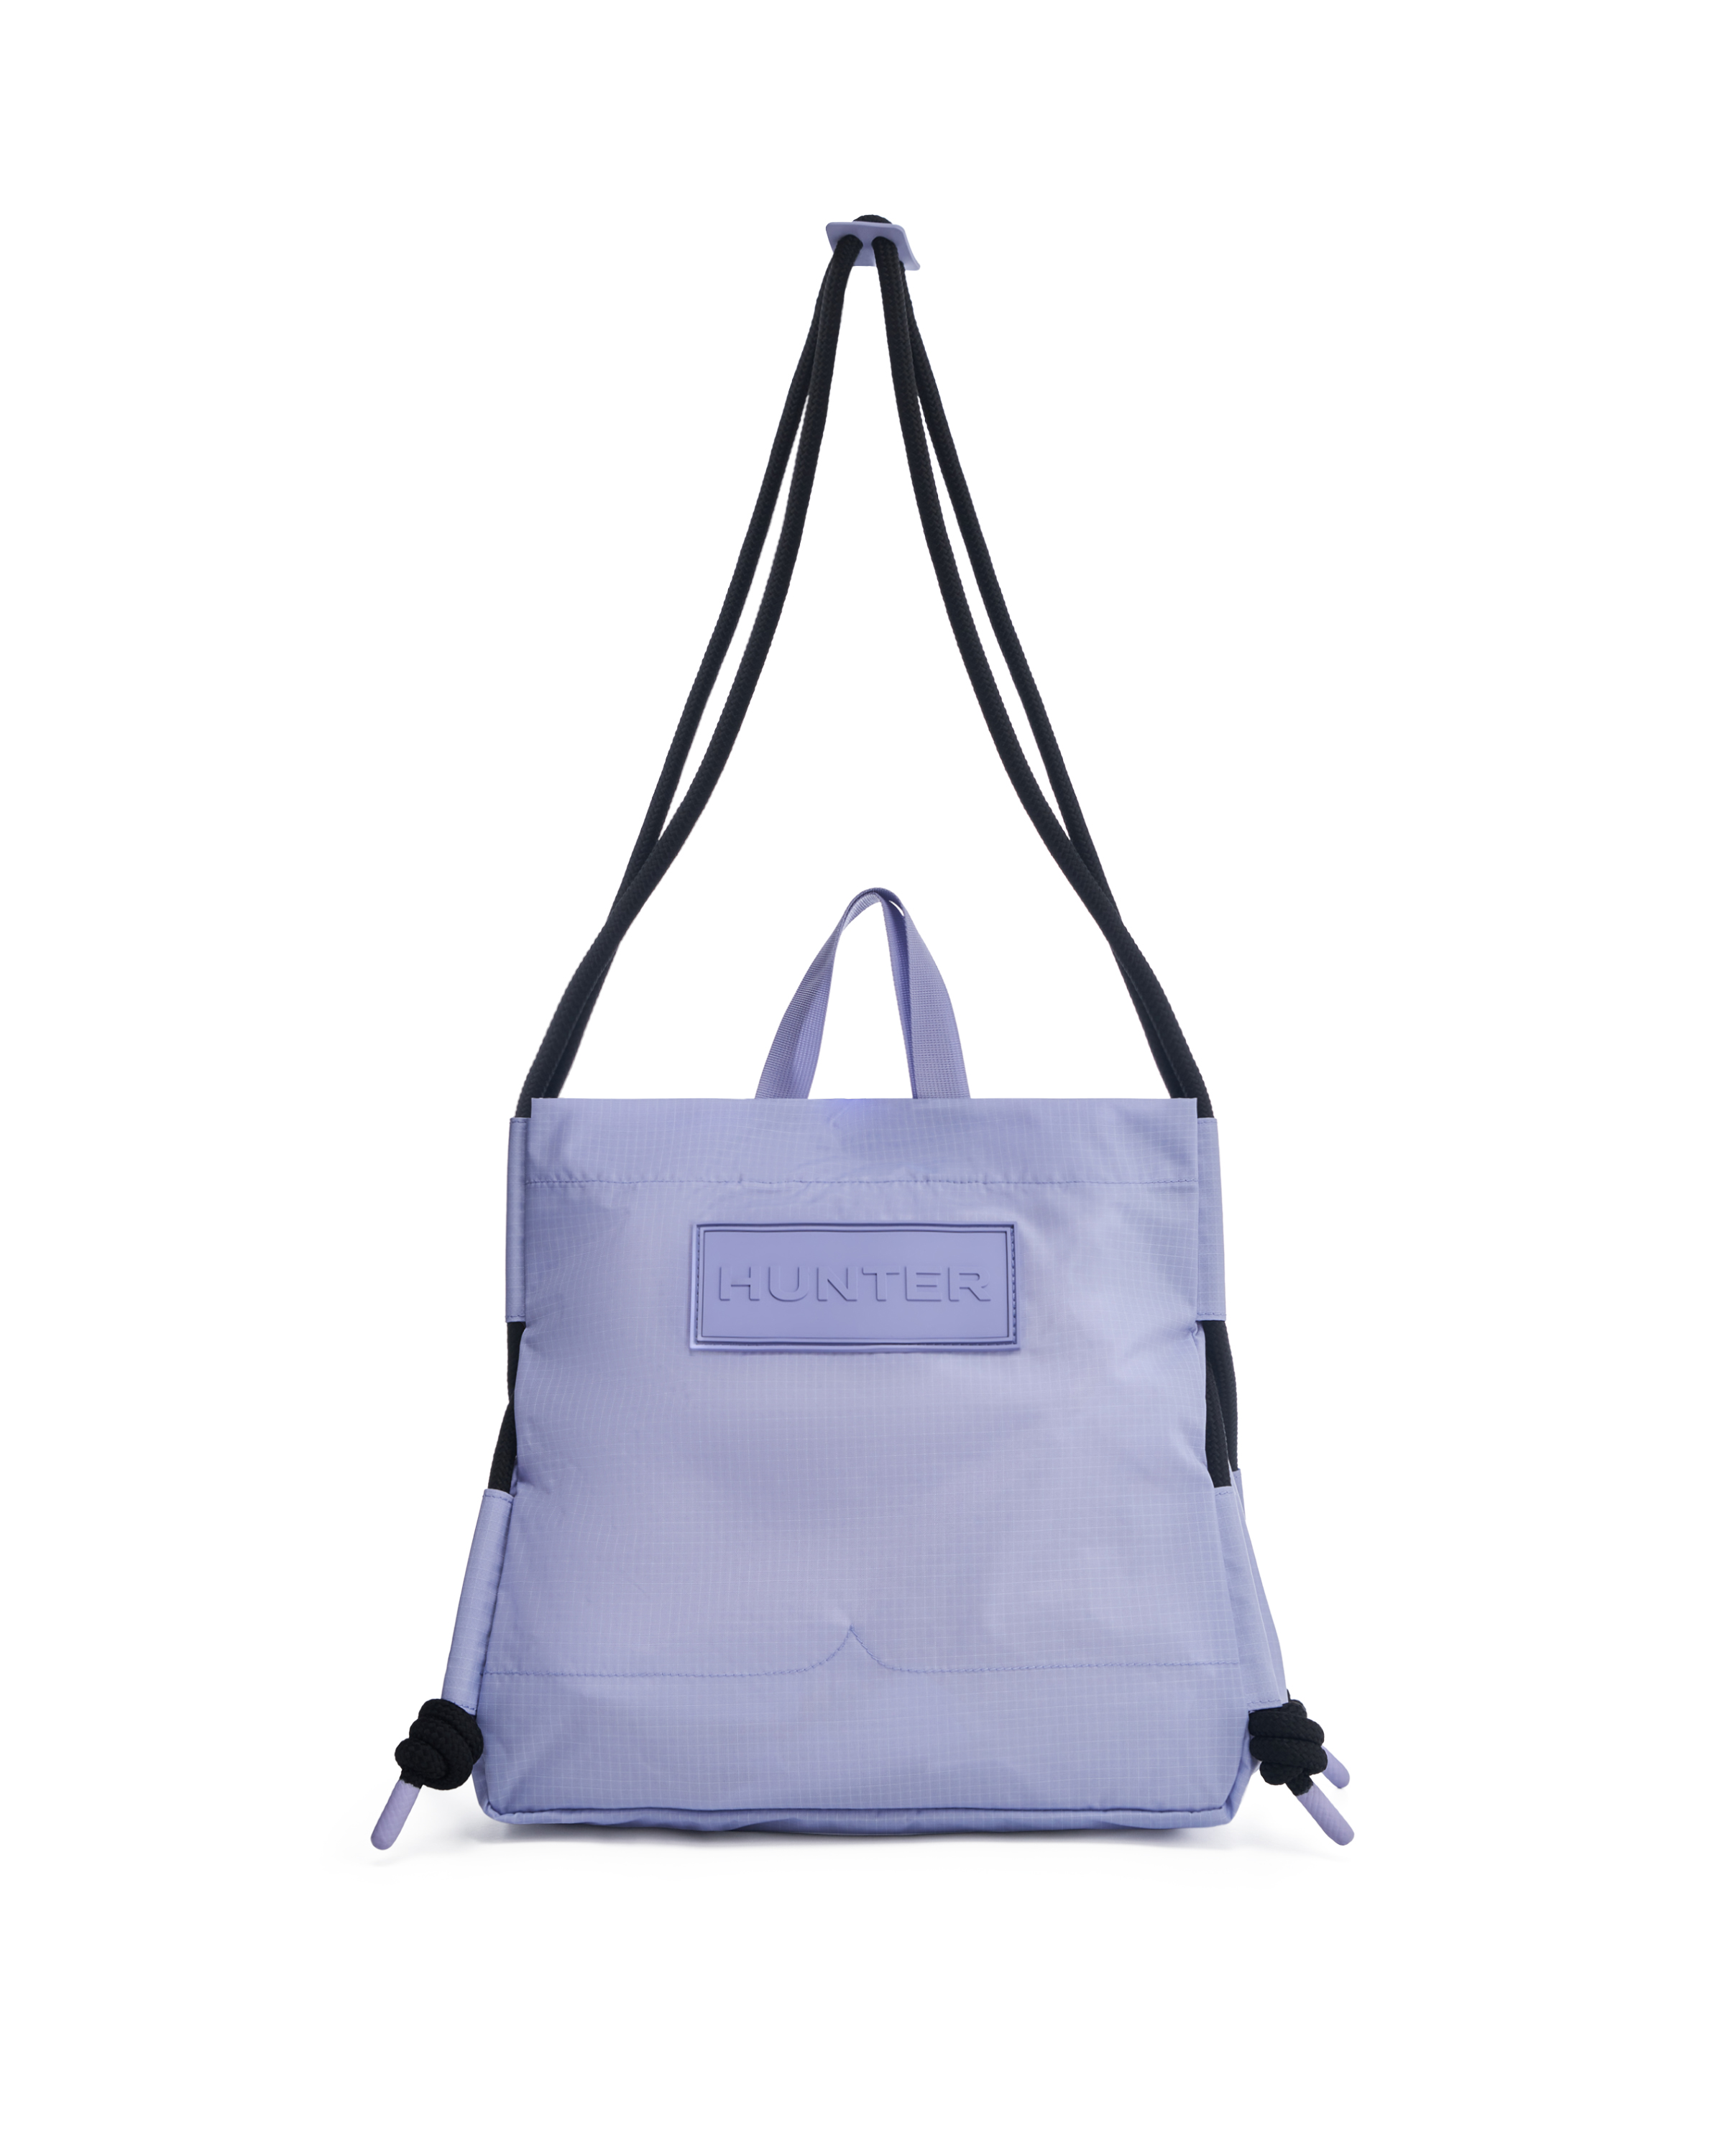 TRAVEL RIPSTOP TOTE